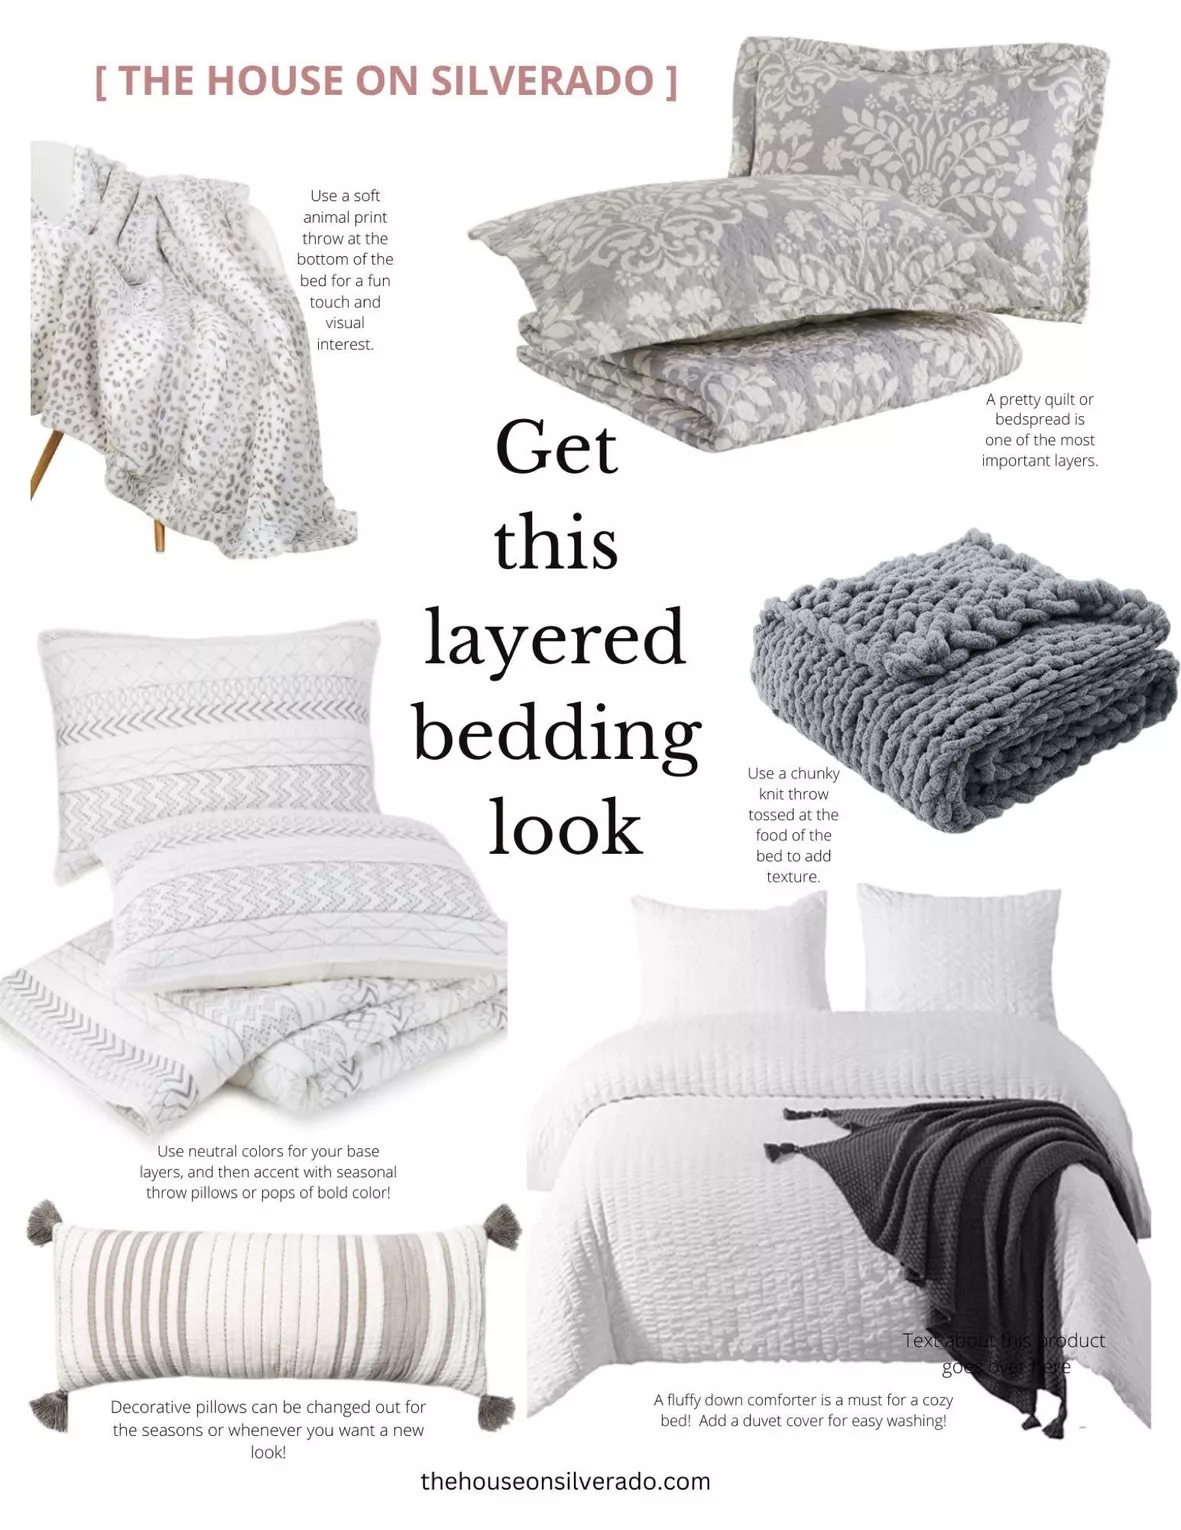 Hygge Throw Blanket  Shop Exclusive Hotel Bedding, Pillows